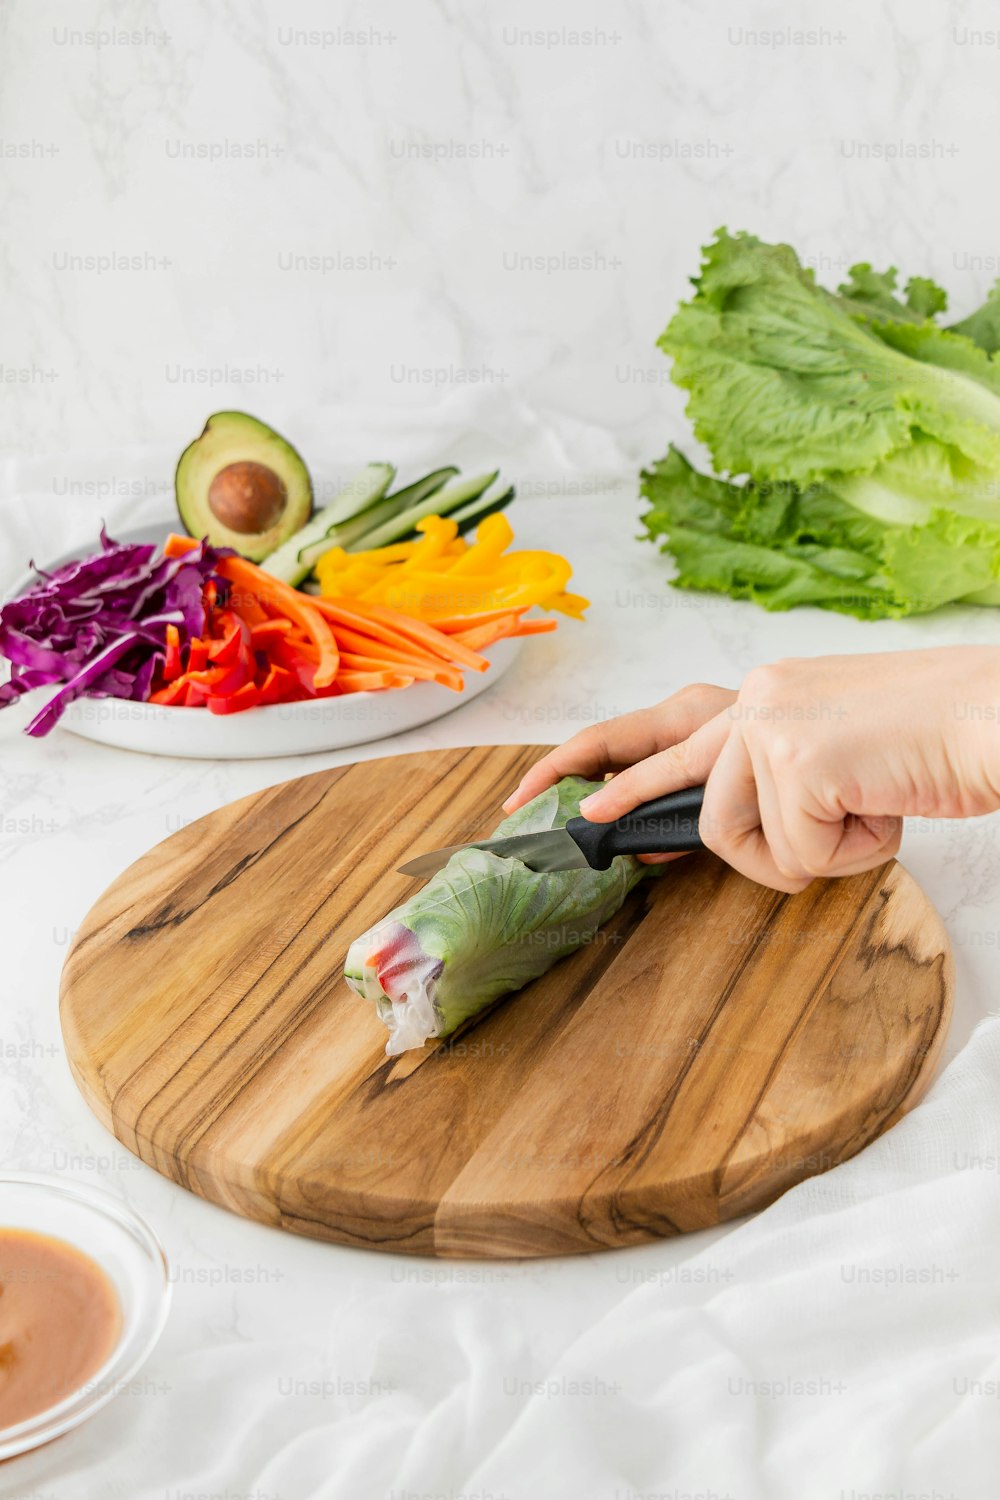 a person cutting up a vegetable on a cutting board